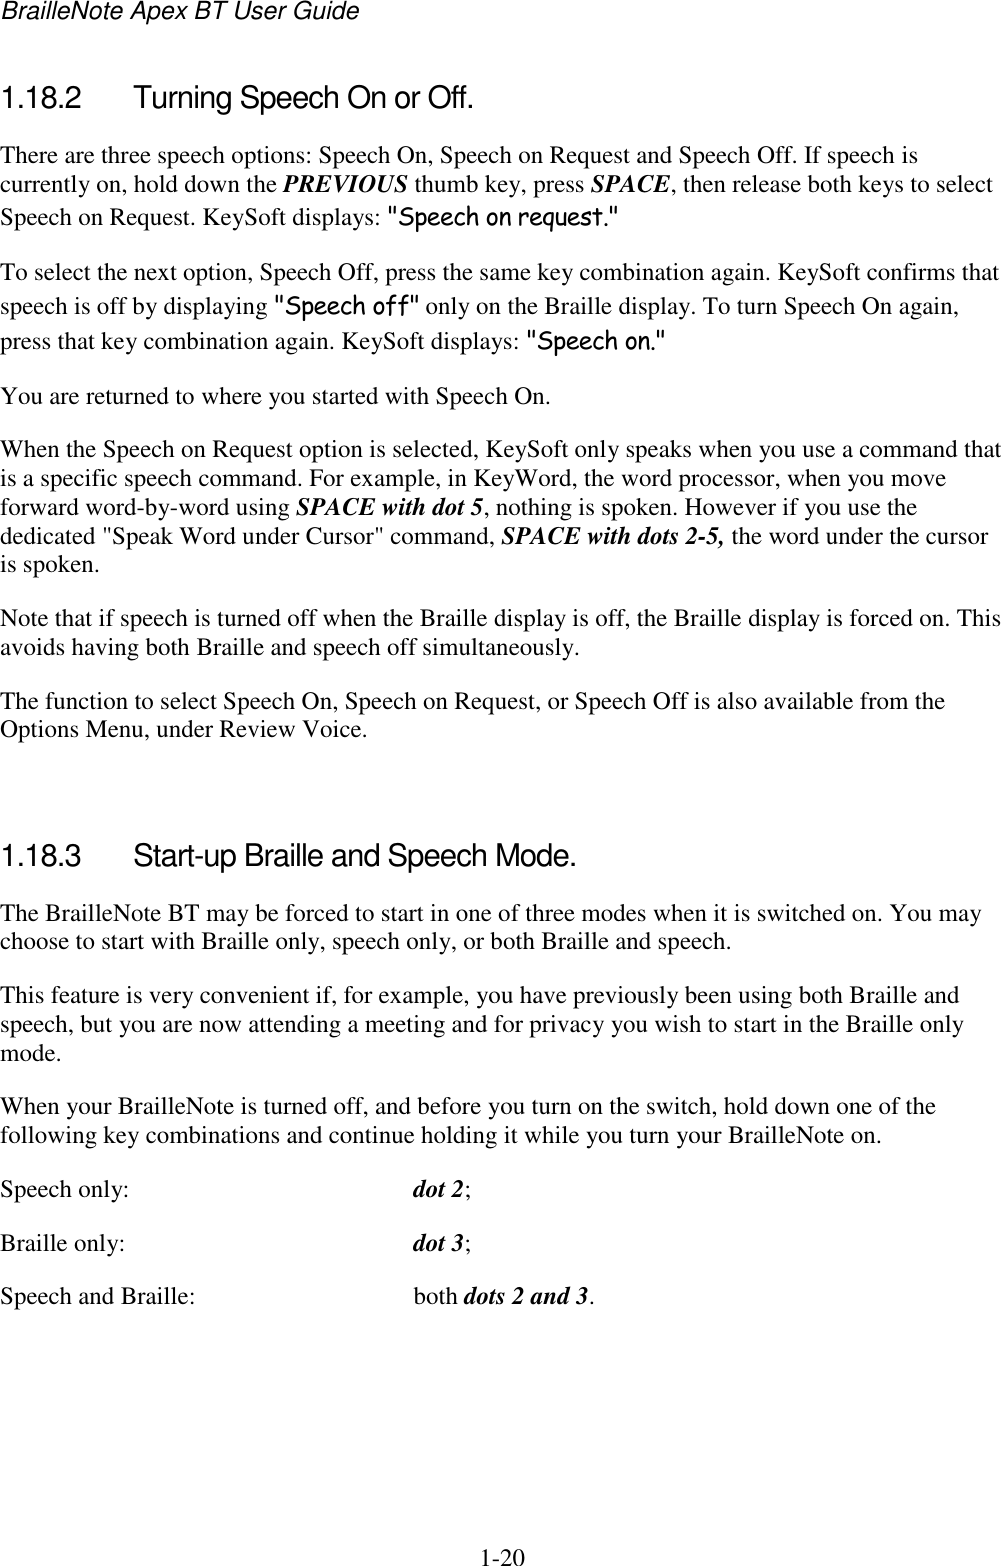 BrailleNote Apex BT User Guide   1-20   1.18.2  Turning Speech On or Off. There are three speech options: Speech On, Speech on Request and Speech Off. If speech is currently on, hold down the PREVIOUS thumb key, press SPACE, then release both keys to select Speech on Request. KeySoft displays: &quot;Speech on request.&quot; To select the next option, Speech Off, press the same key combination again. KeySoft confirms that speech is off by displaying &quot;Speech off&quot; only on the Braille display. To turn Speech On again, press that key combination again. KeySoft displays: &quot;Speech on.&quot; You are returned to where you started with Speech On. When the Speech on Request option is selected, KeySoft only speaks when you use a command that is a specific speech command. For example, in KeyWord, the word processor, when you move forward word-by-word using SPACE with dot 5, nothing is spoken. However if you use the dedicated &quot;Speak Word under Cursor&quot; command, SPACE with dots 2-5, the word under the cursor is spoken. Note that if speech is turned off when the Braille display is off, the Braille display is forced on. This avoids having both Braille and speech off simultaneously. The function to select Speech On, Speech on Request, or Speech Off is also available from the Options Menu, under Review Voice.   1.18.3  Start-up Braille and Speech Mode. The BrailleNote BT may be forced to start in one of three modes when it is switched on. You may choose to start with Braille only, speech only, or both Braille and speech. This feature is very convenient if, for example, you have previously been using both Braille and speech, but you are now attending a meeting and for privacy you wish to start in the Braille only mode. When your BrailleNote is turned off, and before you turn on the switch, hold down one of the following key combinations and continue holding it while you turn your BrailleNote on. Speech only:  dot 2; Braille only:  dot 3; Speech and Braille:  both dots 2 and 3.  